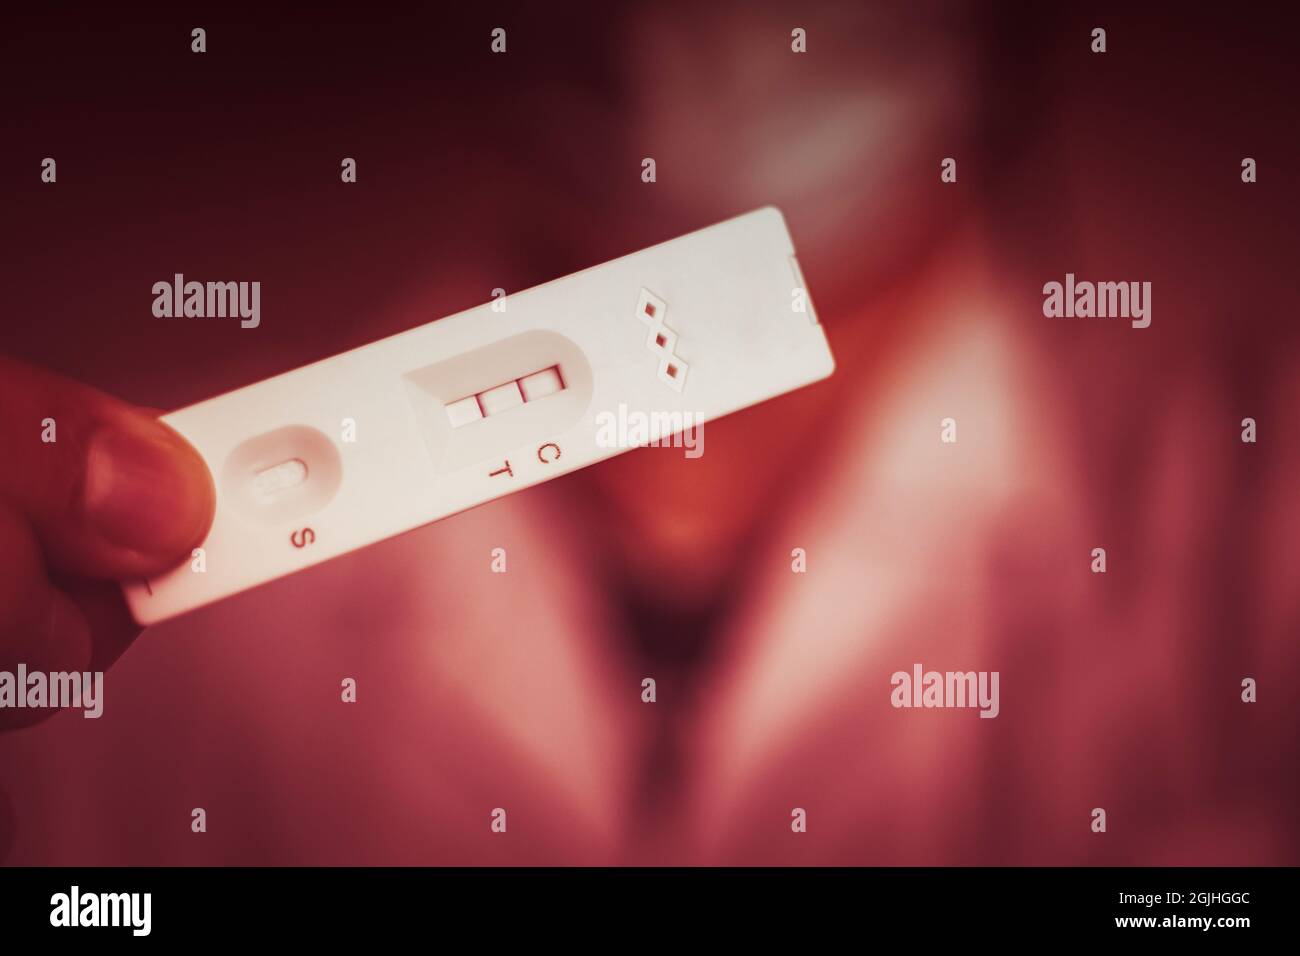 Antigen test for Covid or Pregnancy show visible line at Test position for detected or positive result red color tone. Stock Photo